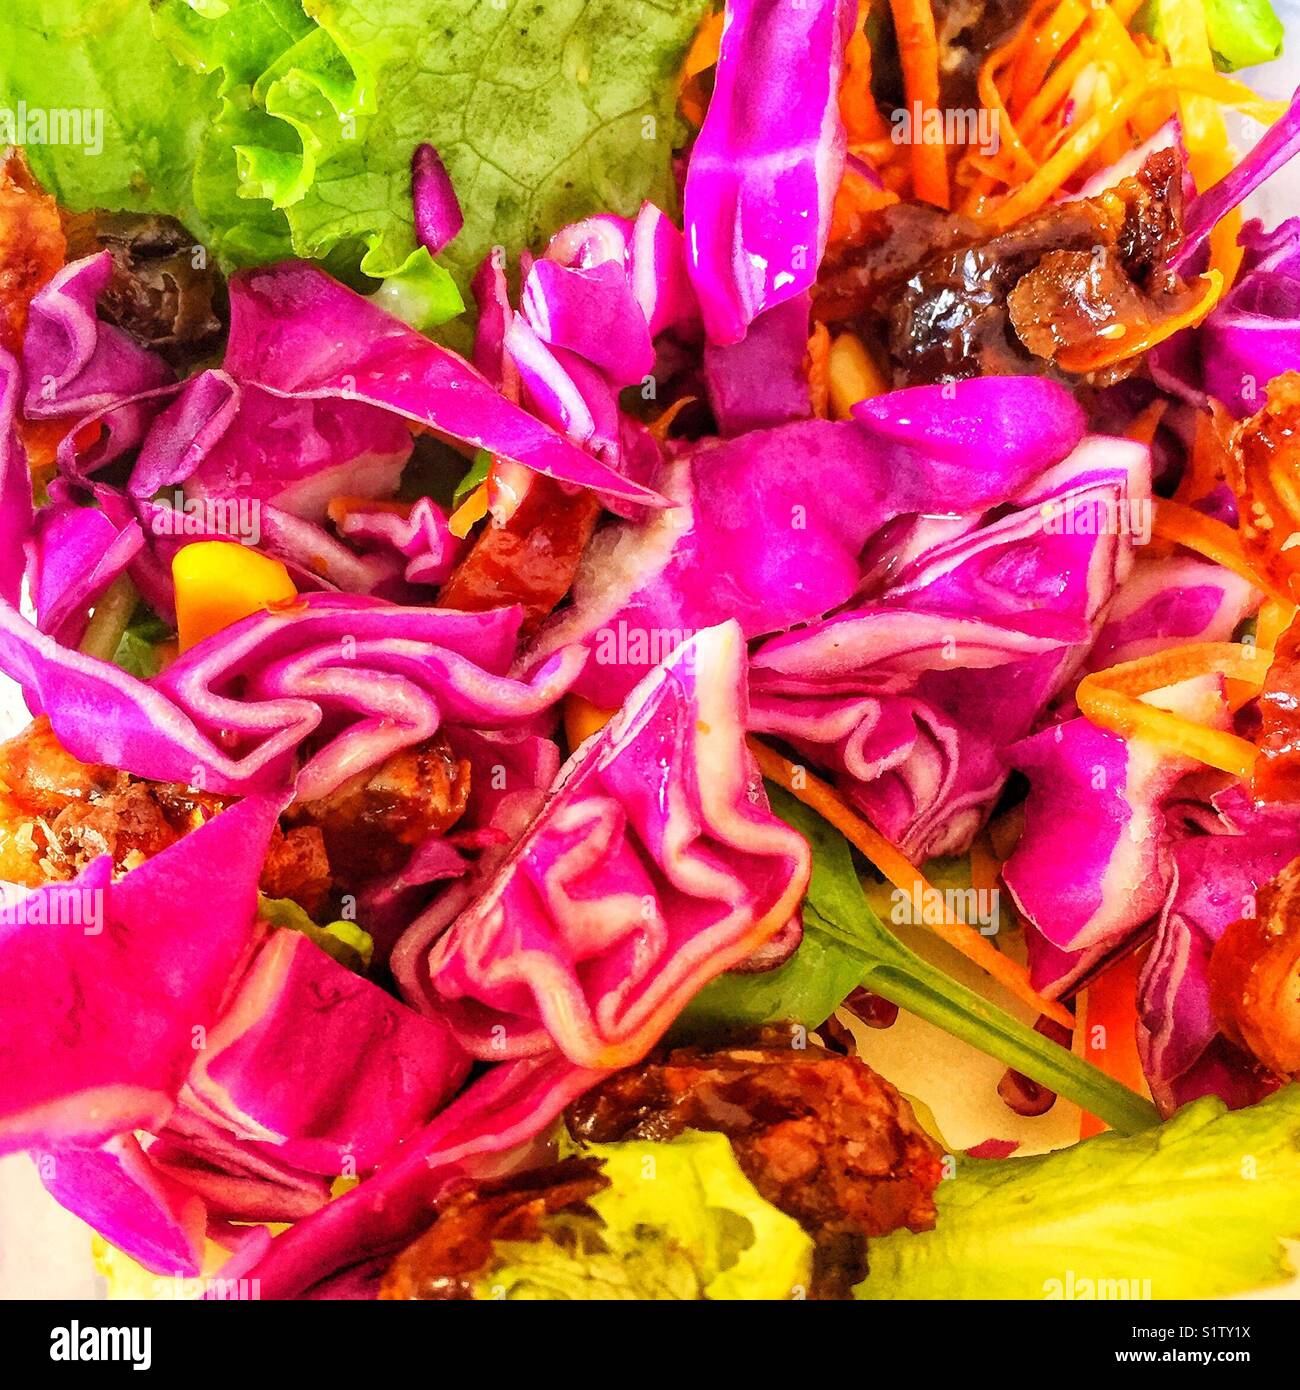 Colourful sweet and crunchy salad with red cabbage and dates Stock Photo